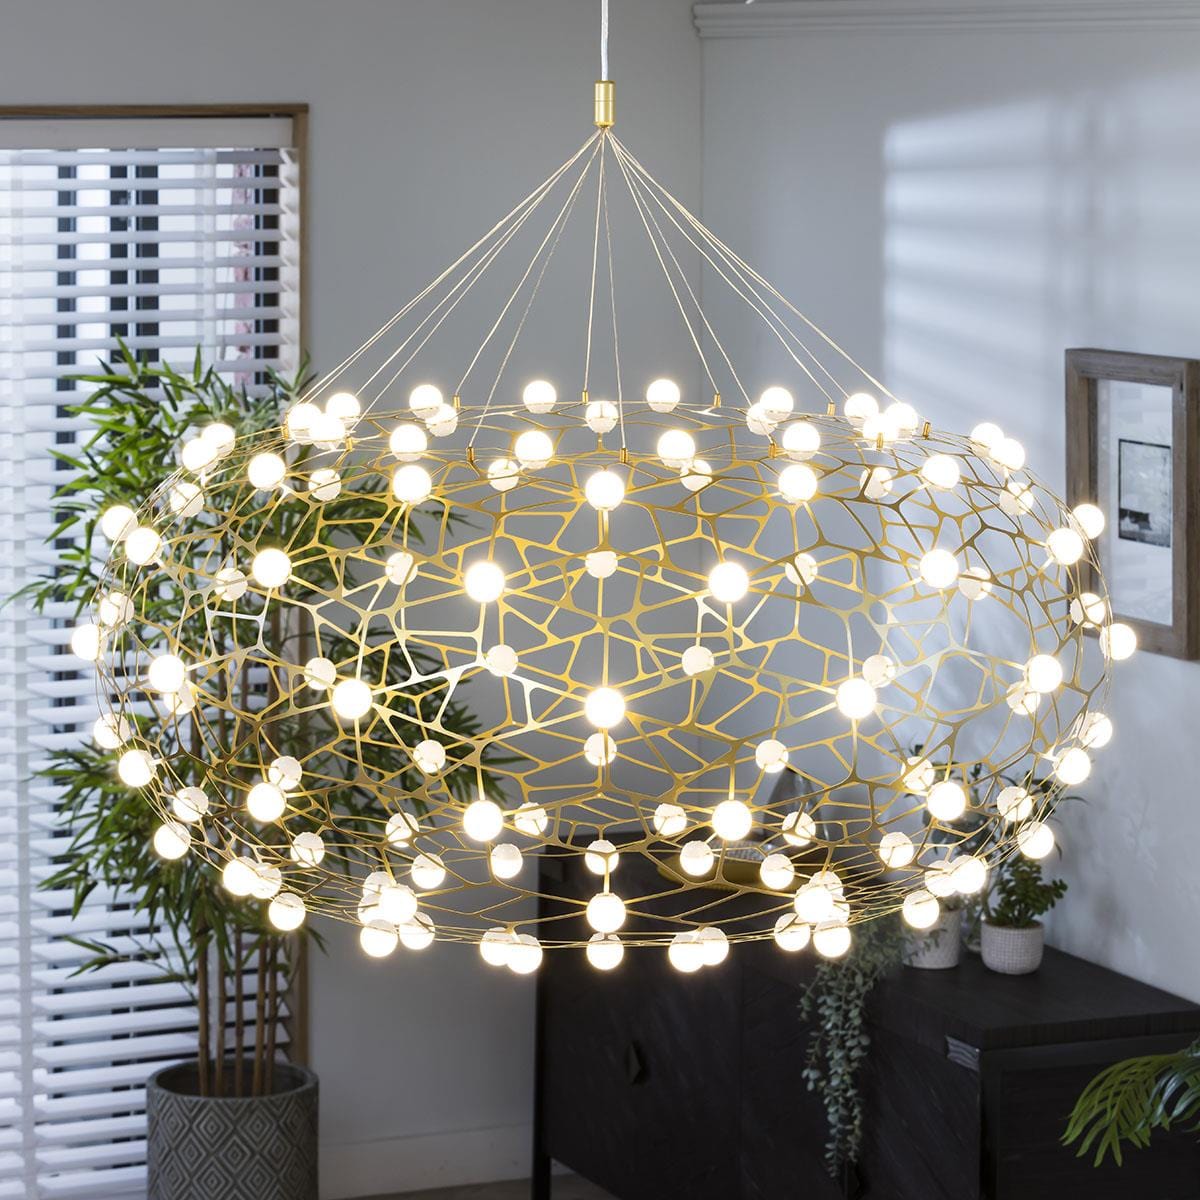 Cameo 4 Light 44 inch Campagne Luxe Linear Chandelier Ceiling Light